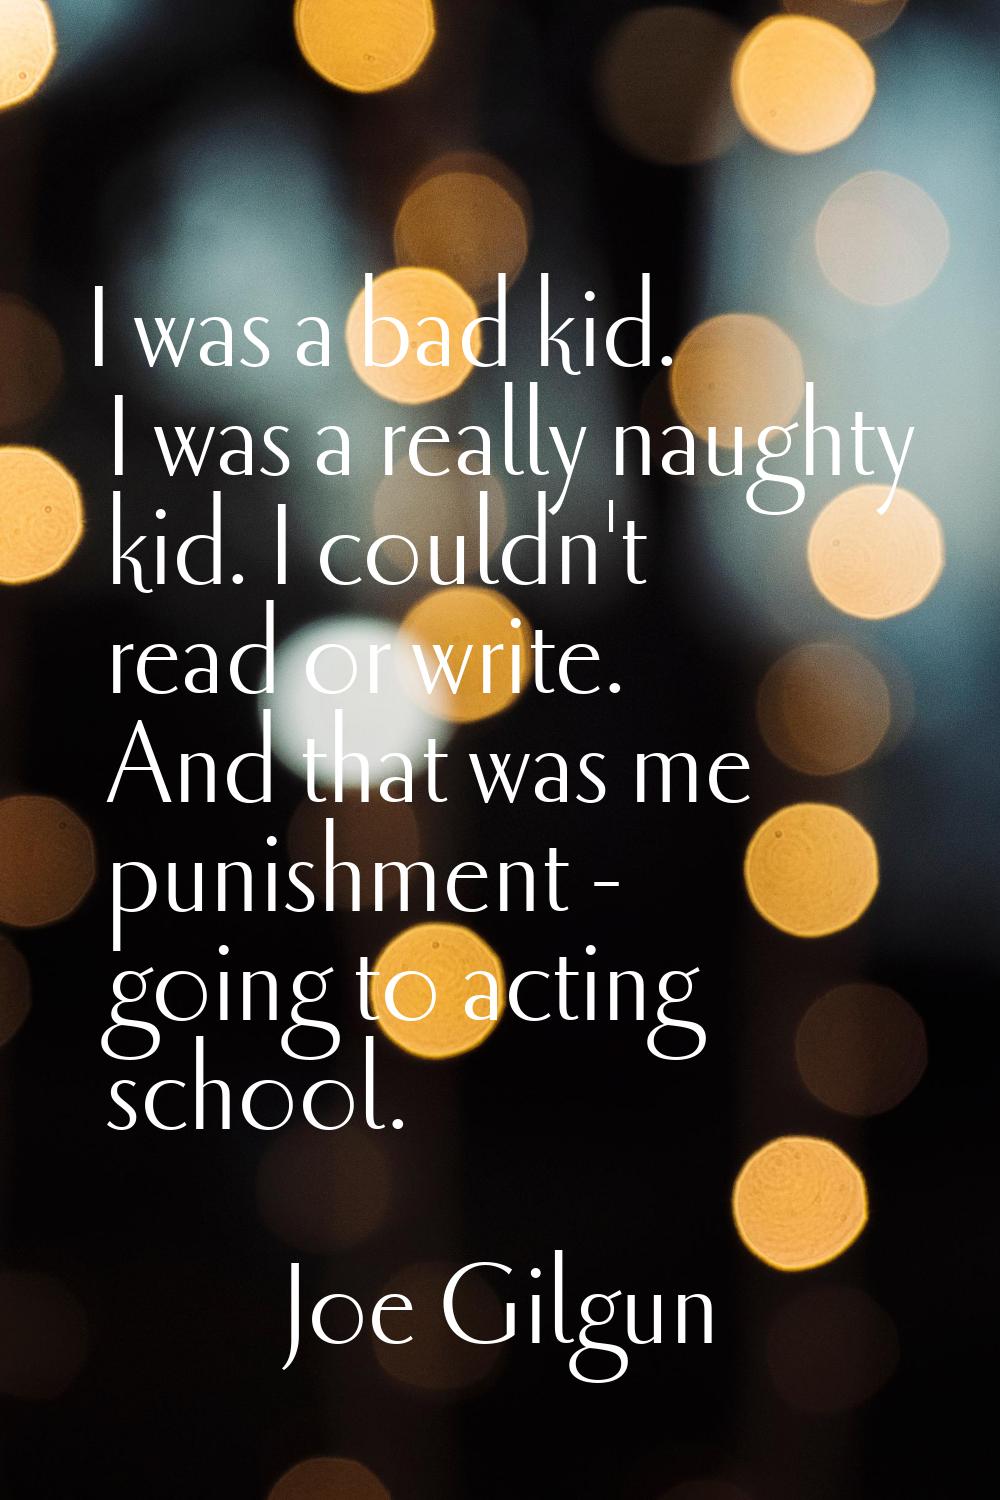 I was a bad kid. I was a really naughty kid. I couldn't read or write. And that was me punishment -